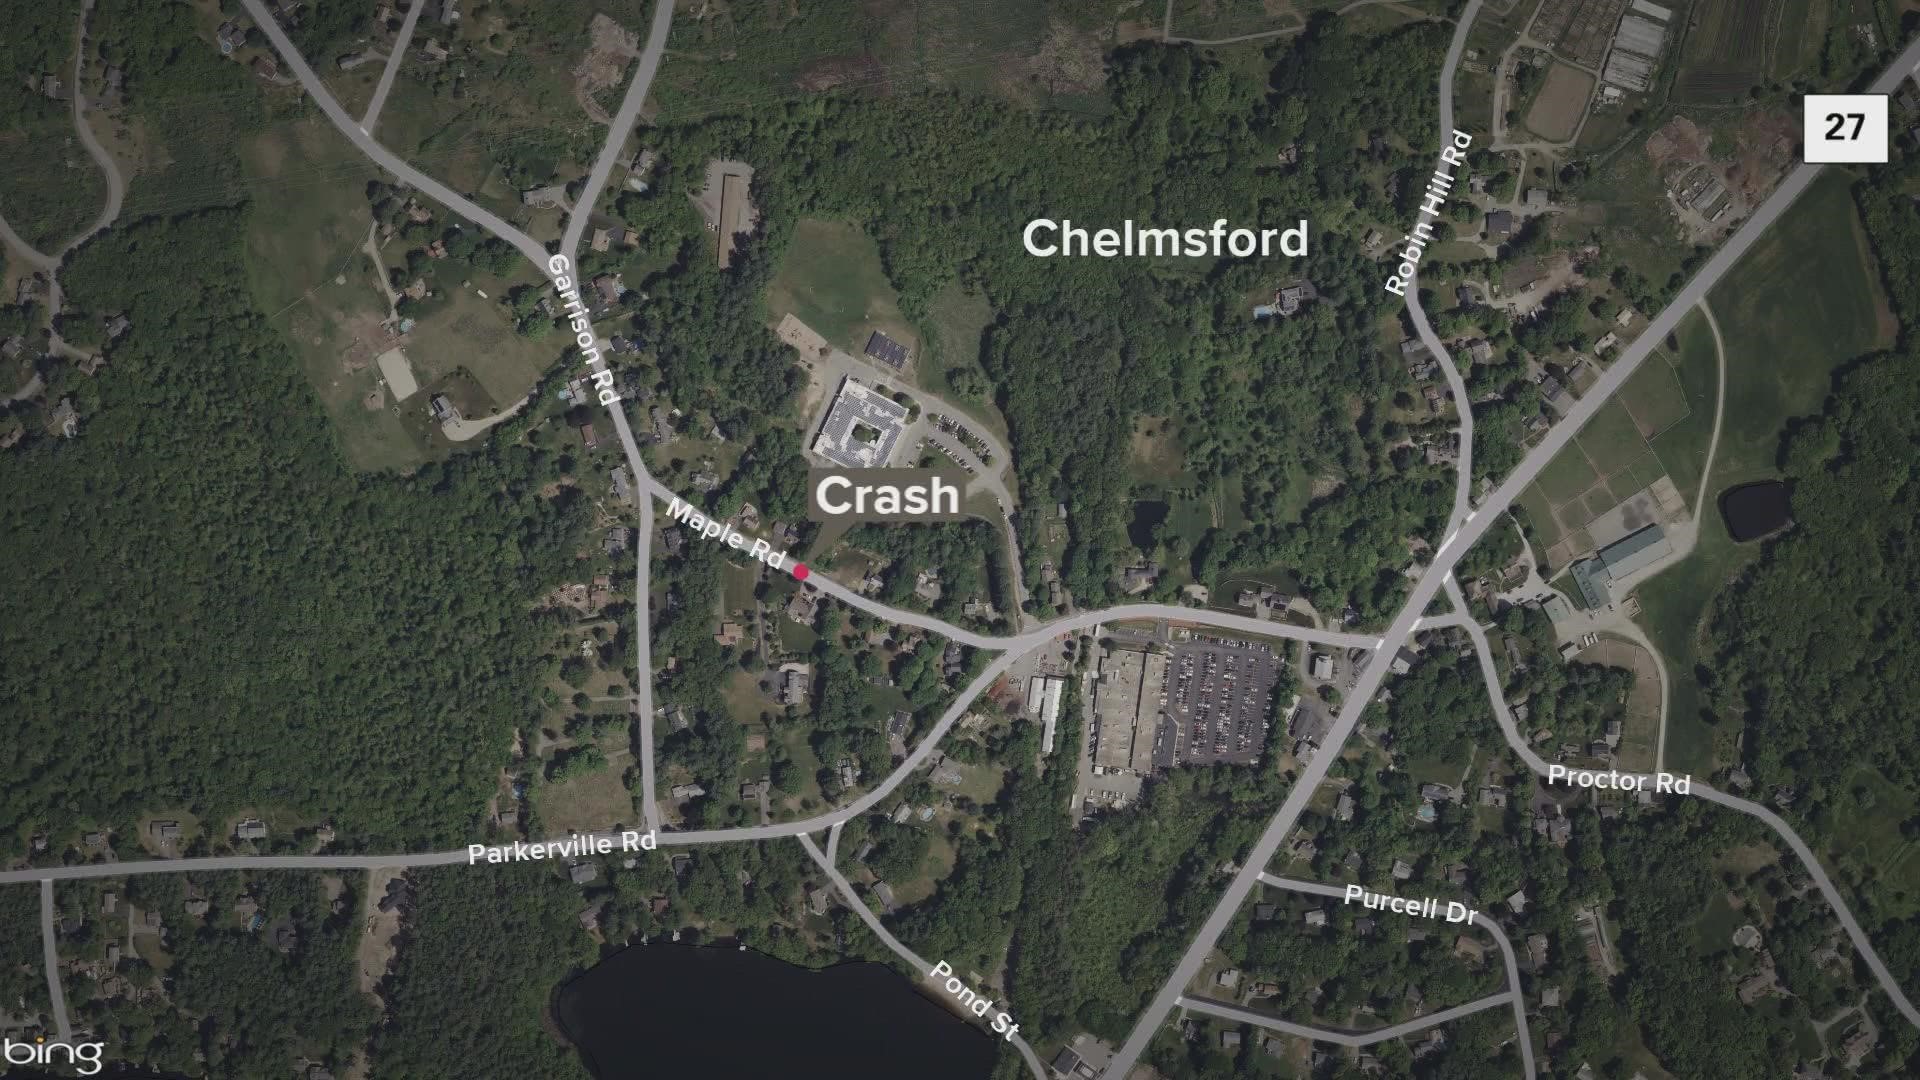 A 71-year-old man from Biddeford is in critical condition after being struck by a vehicle in Massachusetts.